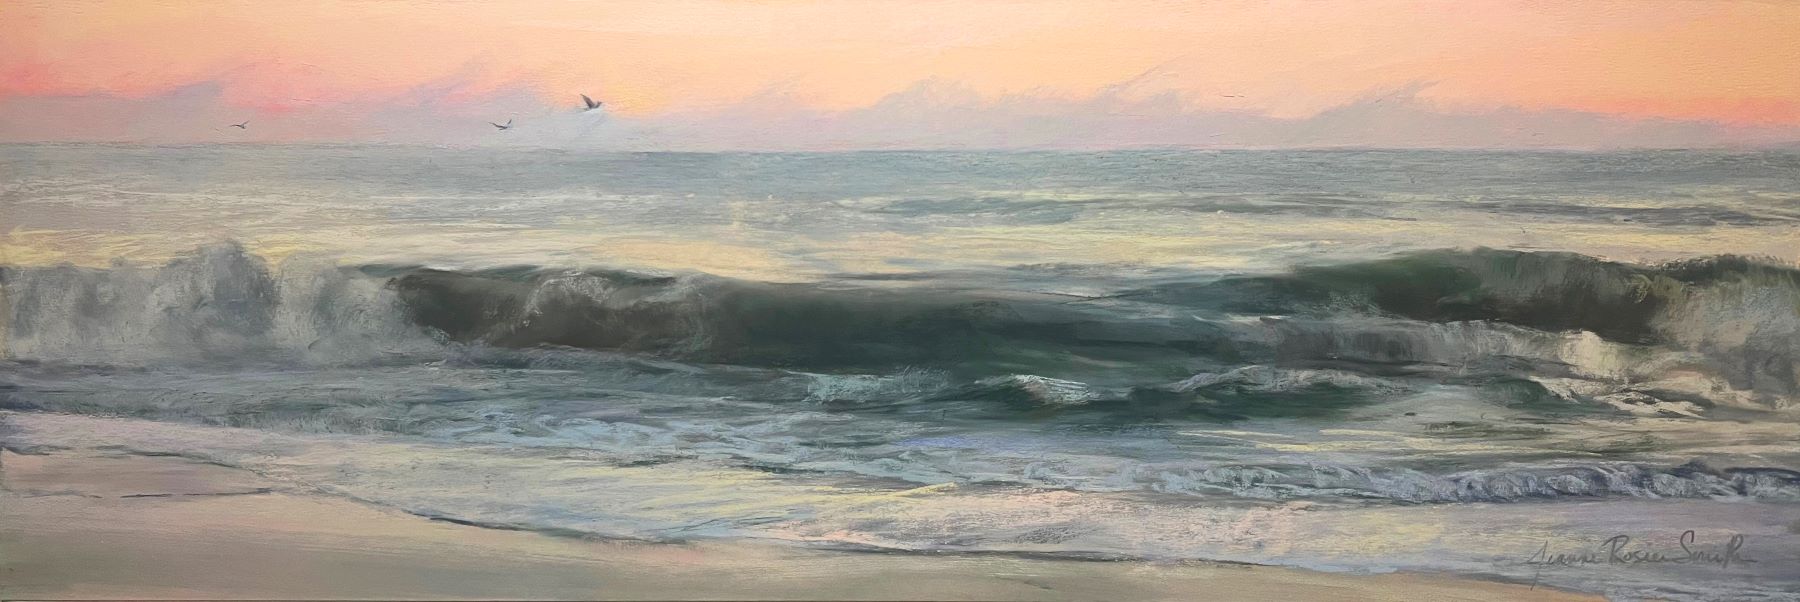 A painting of the early morning mist with gulls among the ocean breakers with the sun rising above the horizon, the sea is bathed in a rosy glow in a panoramic format for capturing the story of wave action.